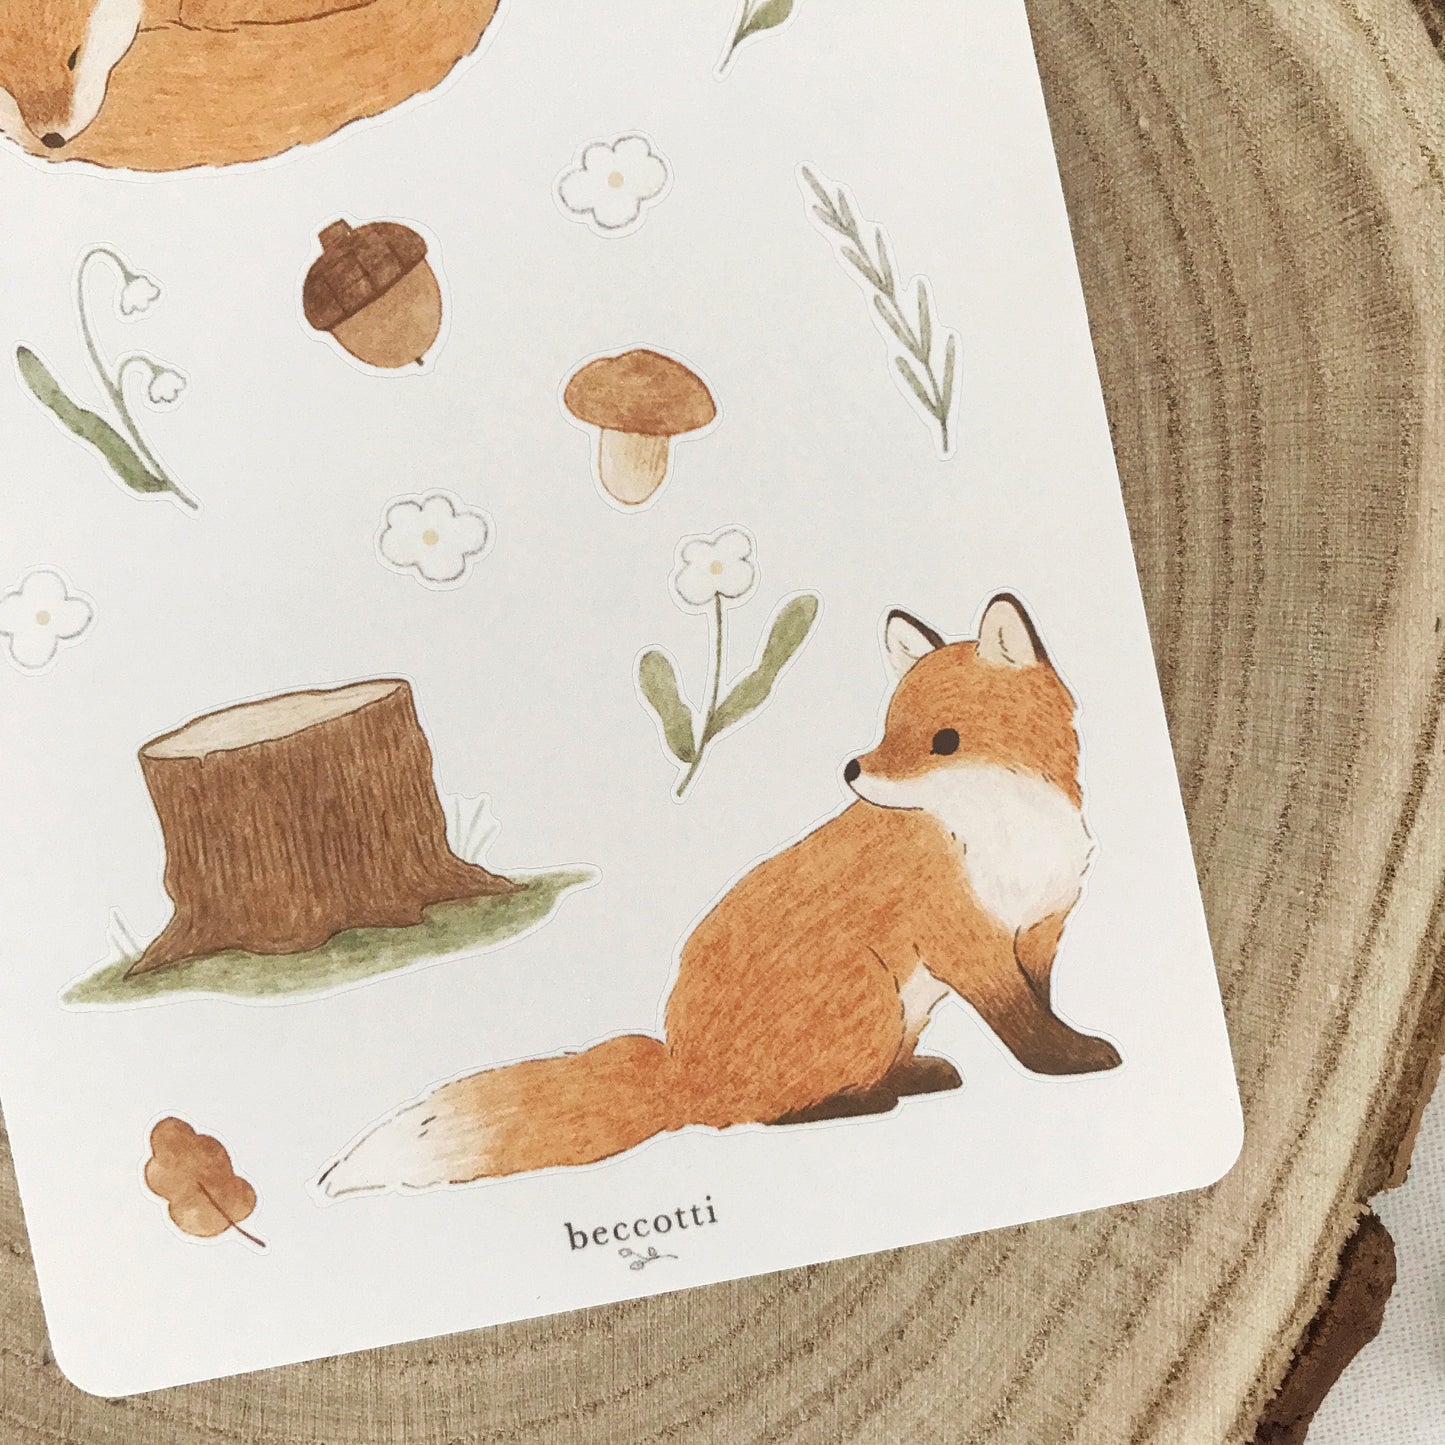 ‘Foxes and foliage’ Sticker Sheet